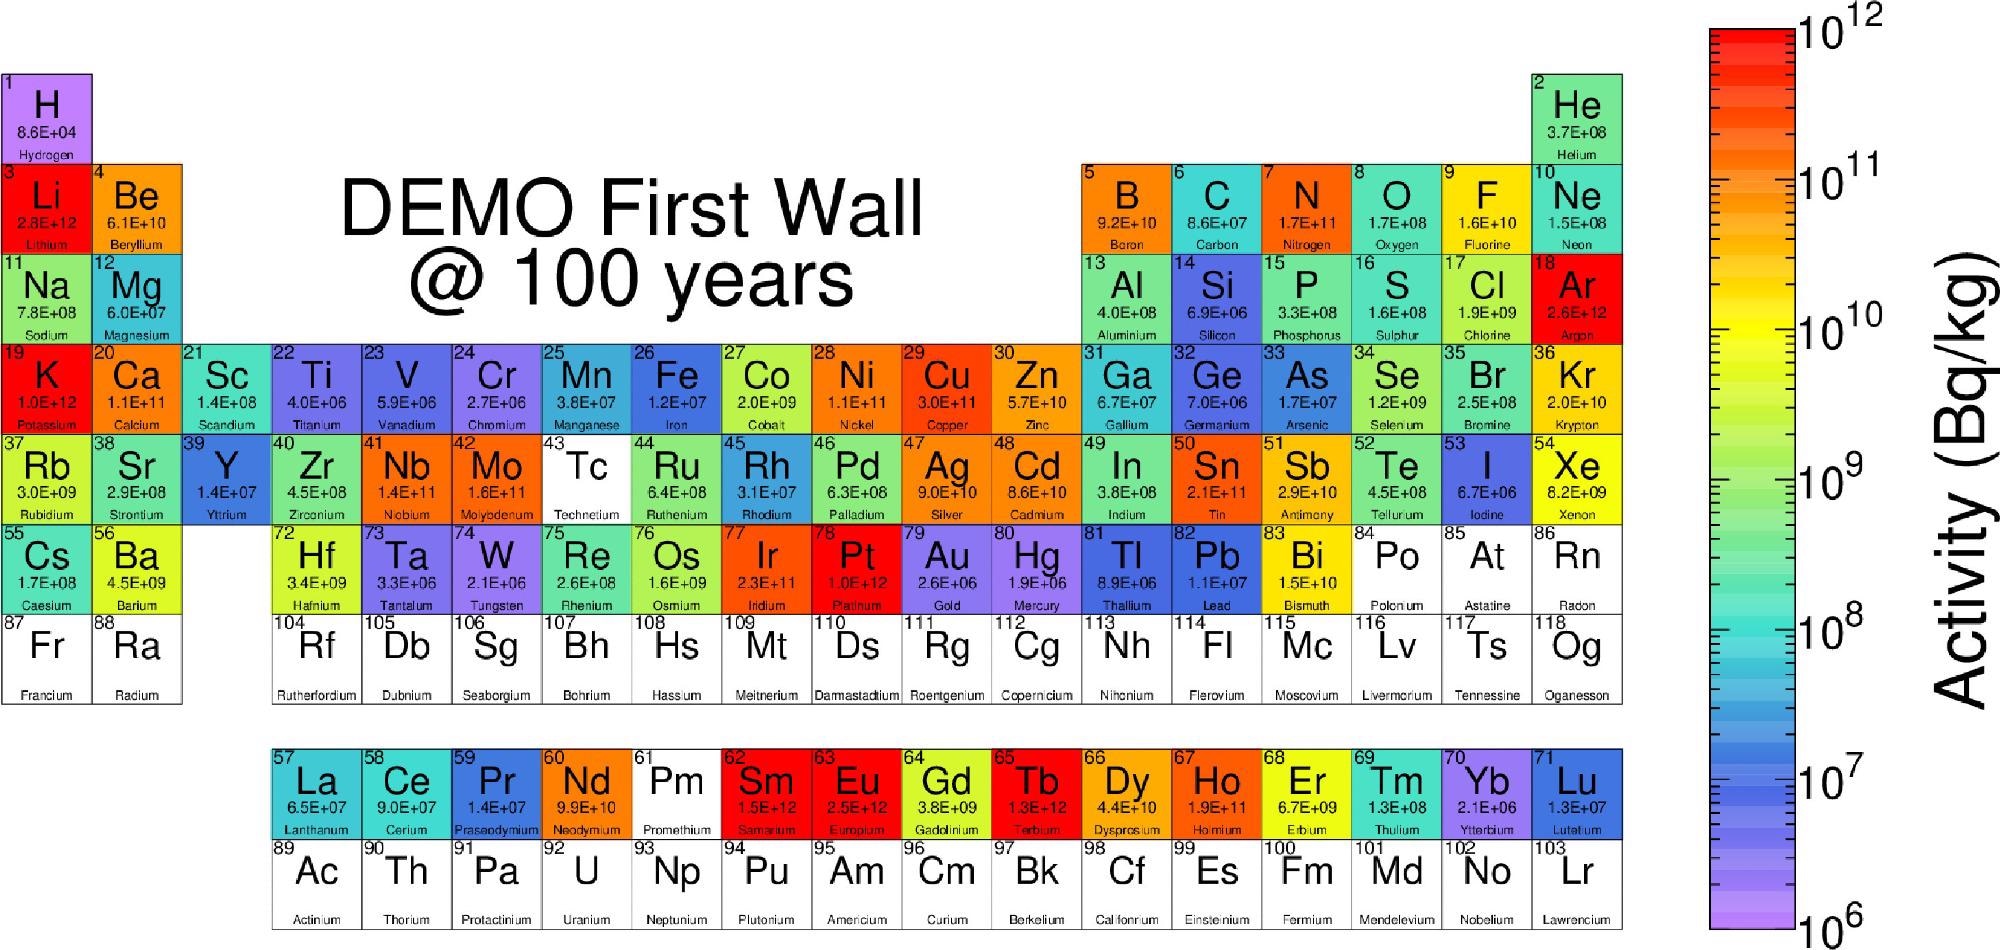 Periodic table showing the total becquerel activity from each element after 100 years of decay cooling following a 2 full power year irradiation in a DEMO firstwall environment. The colour of each element reflects the activity according to the Bq·kg-1 legend, but the absolute values are also given beneath each element symbol.